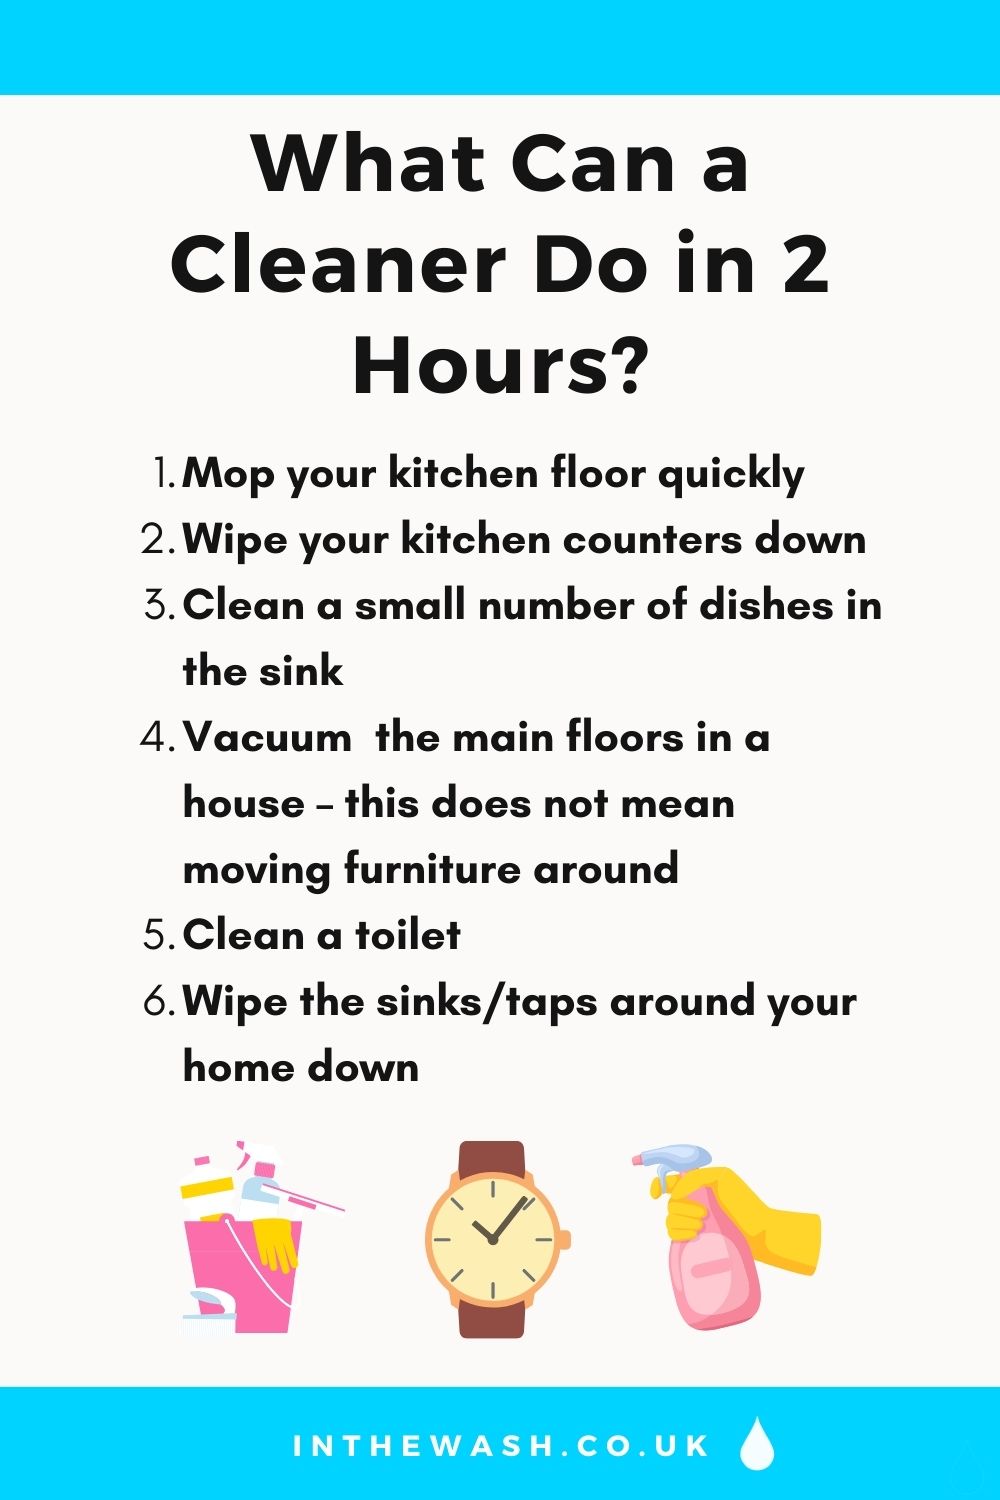 What Can a Cleaner Do in 2 Hours?